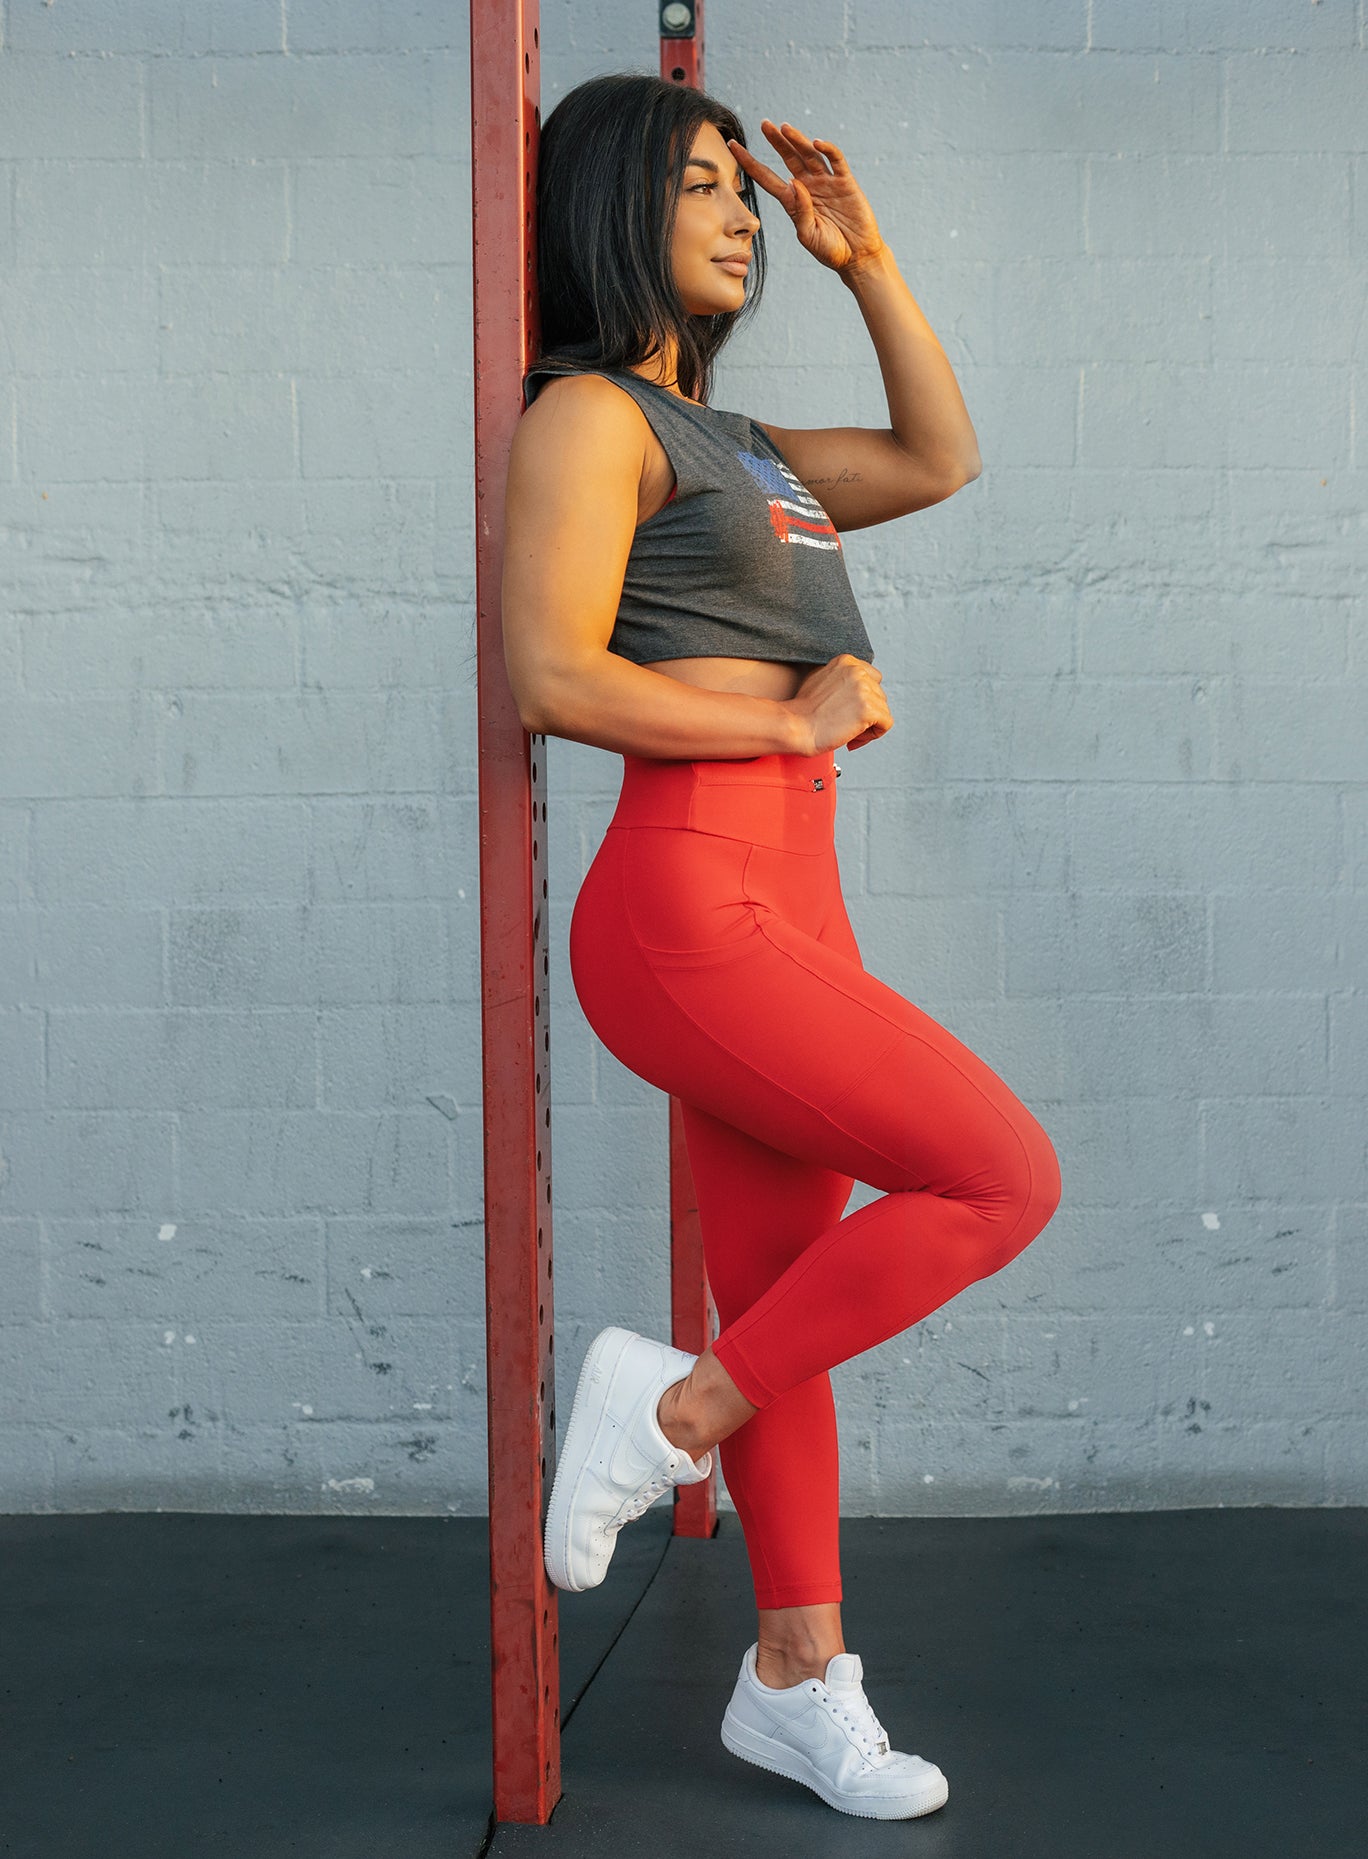 Right side profile view of a model in our red barbell leggings and a gray tee